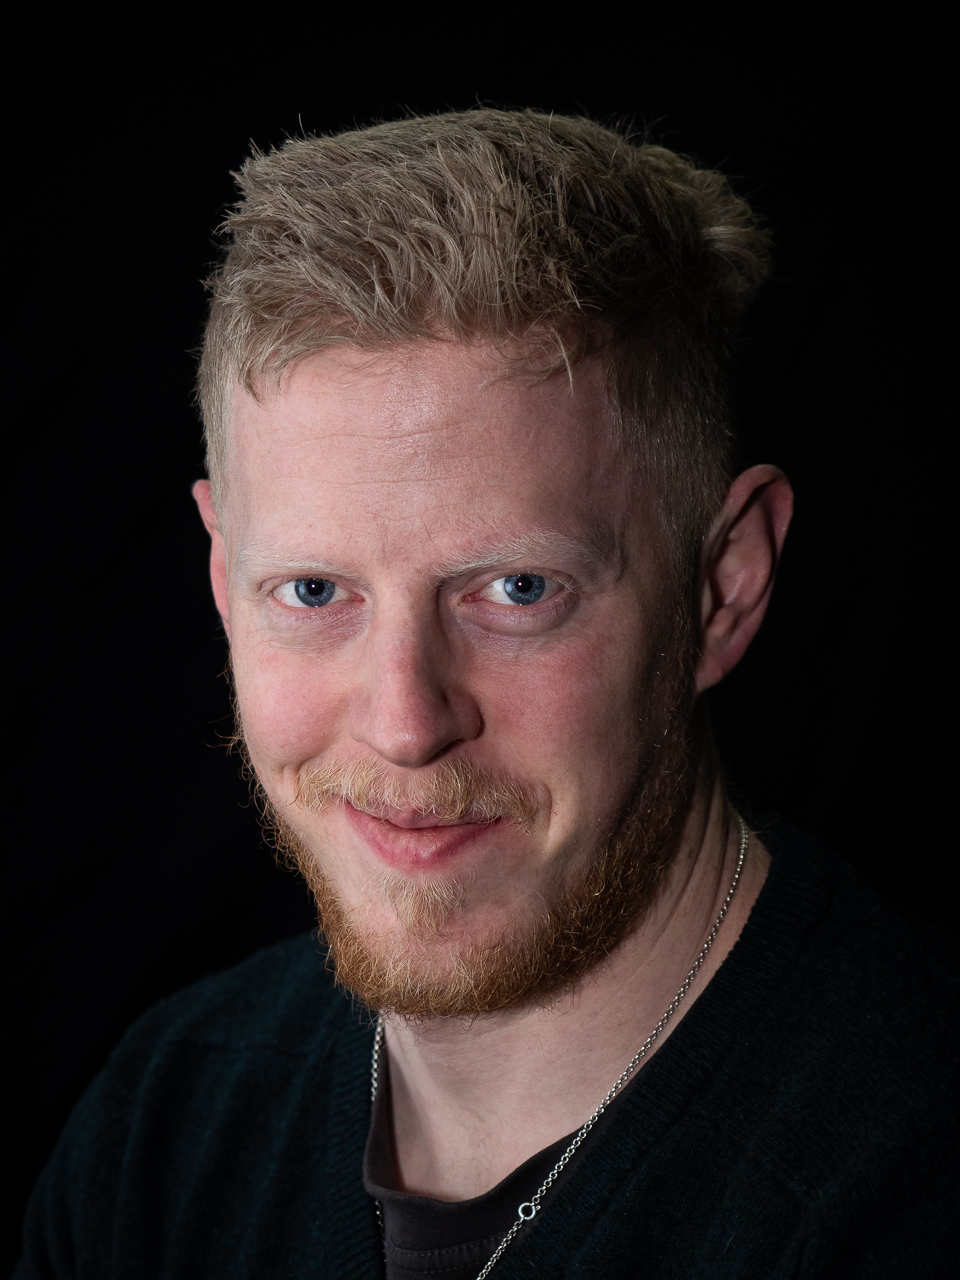 Rob Downham head shot by Andy Wasley: https://andywasley.com